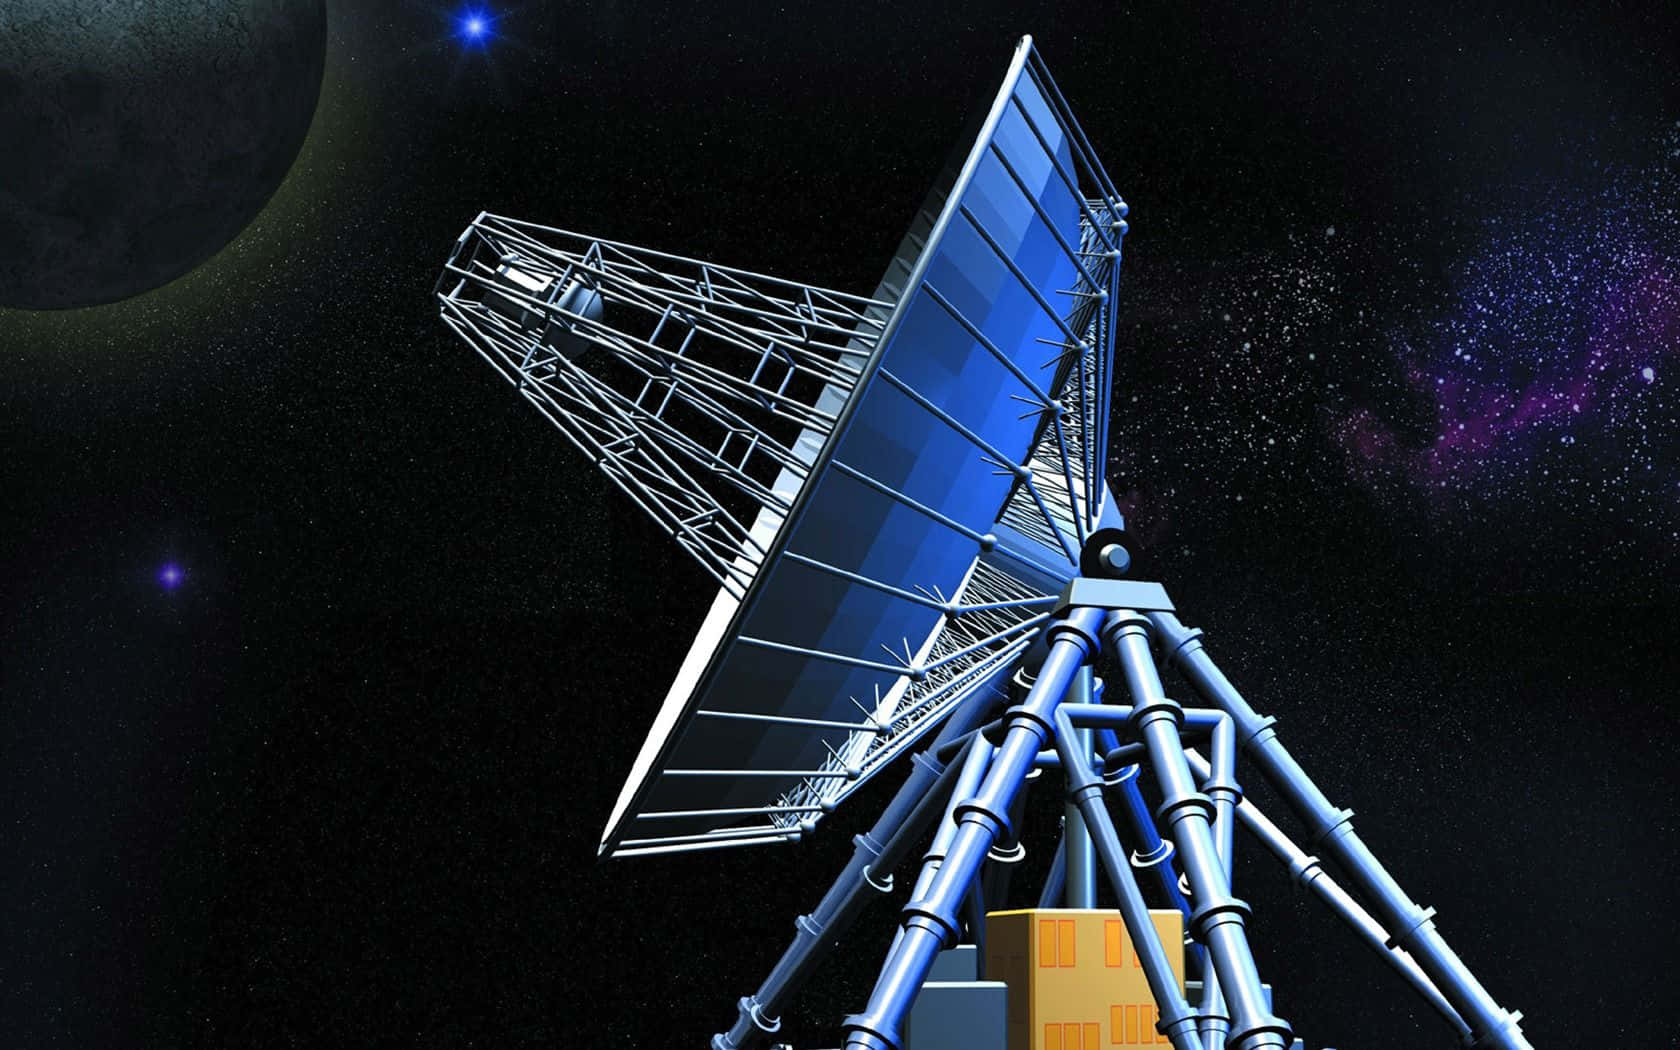 a satellite is shown in the background of a dark night sky